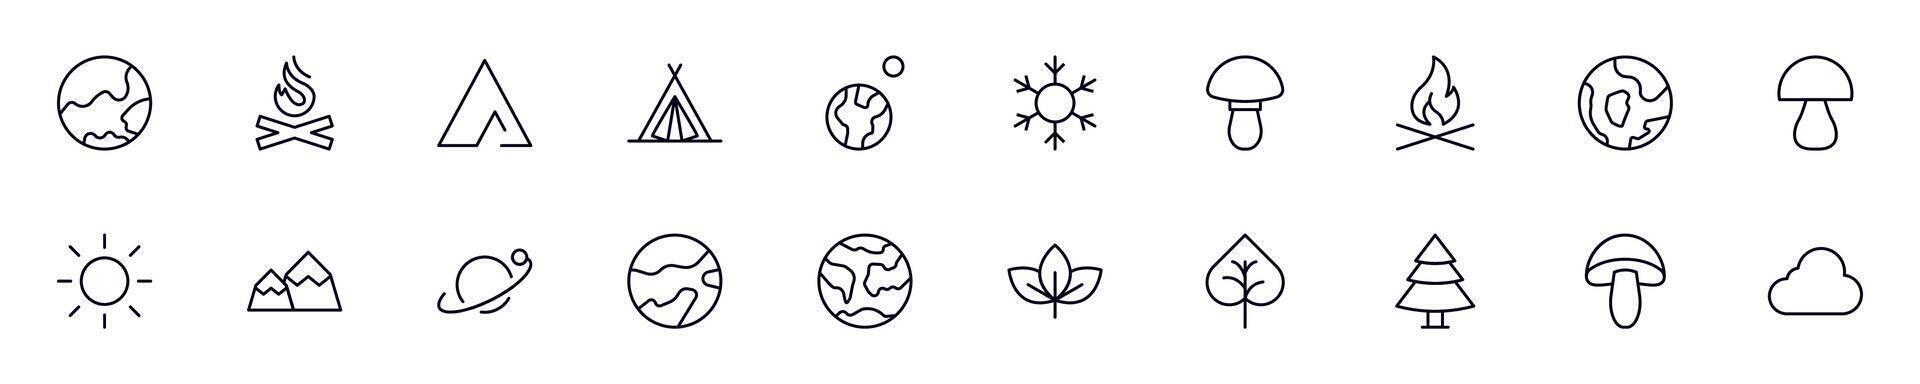 Nature web outline symbols collection for stores, shops, banners, design vector